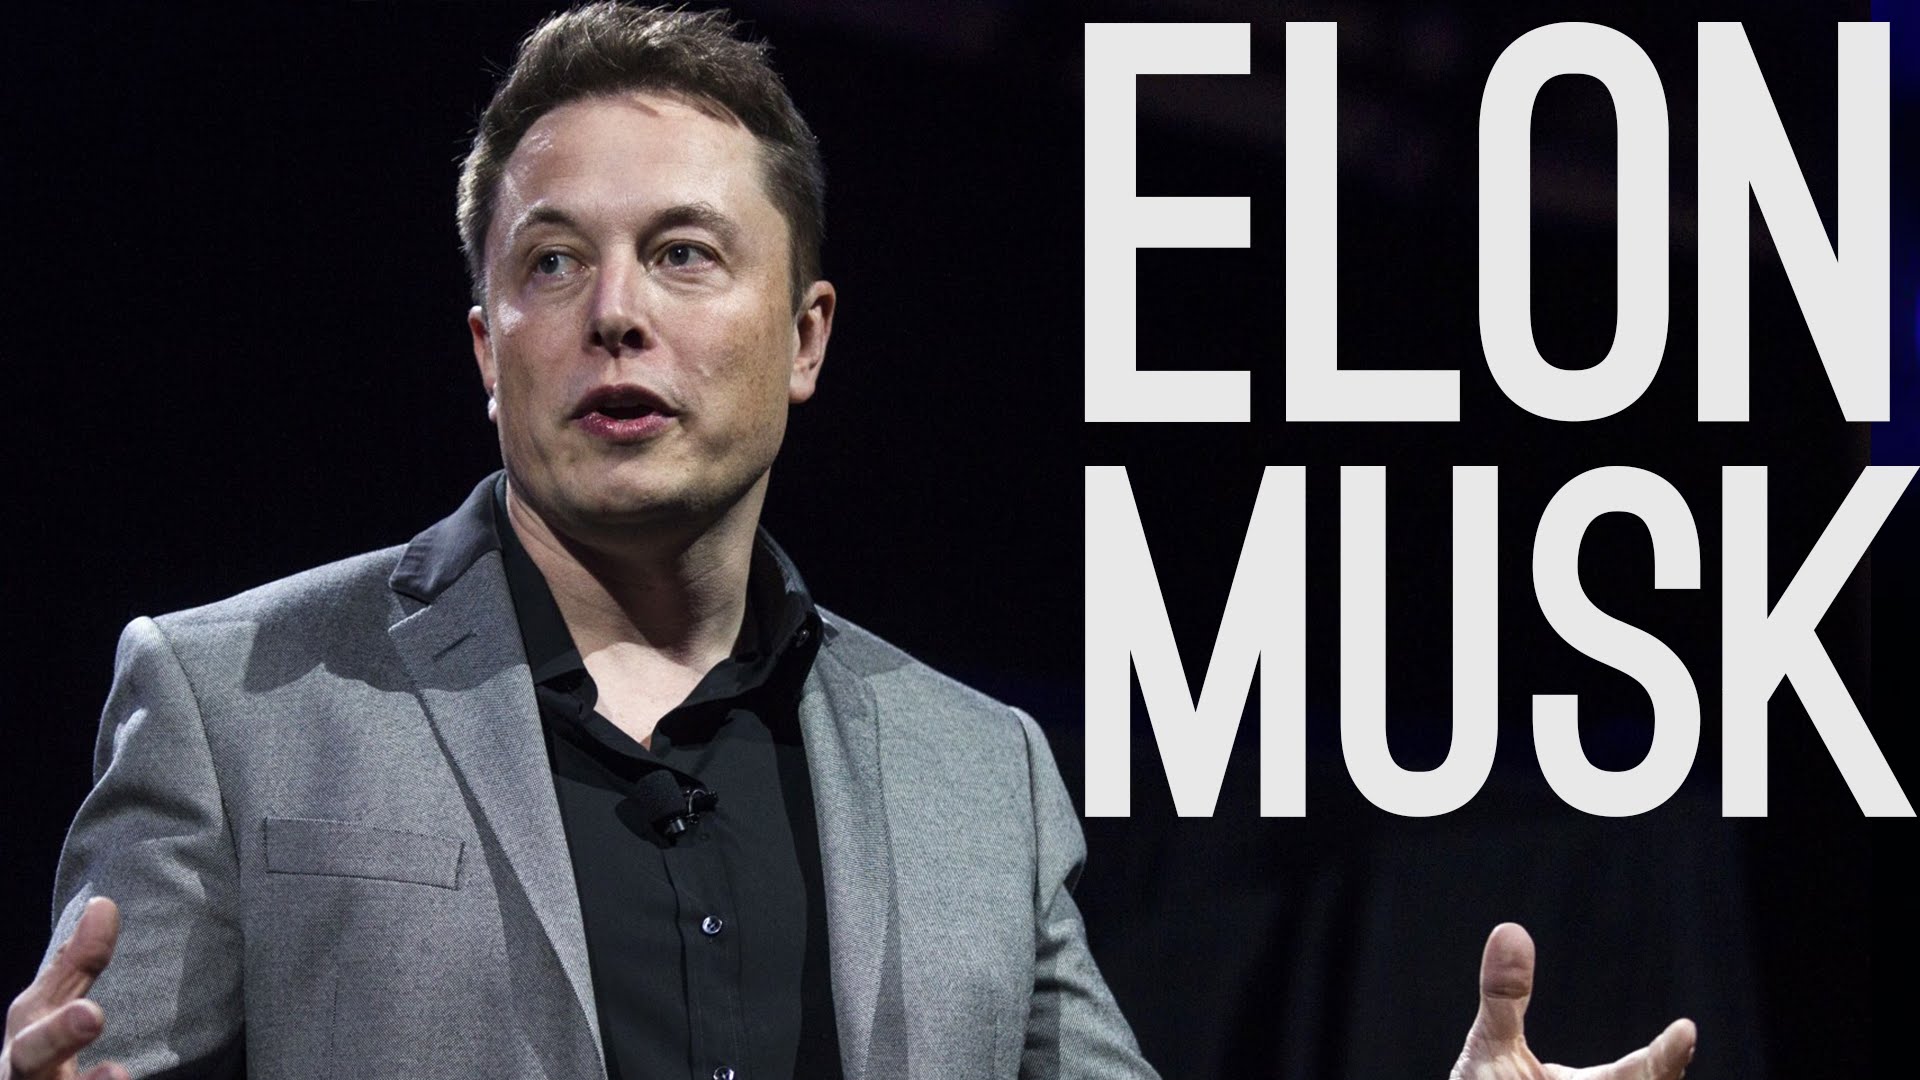 You are currently viewing Tesla’s Elon Musk in Talks with Government to Fix SA’s Energy Crisis.